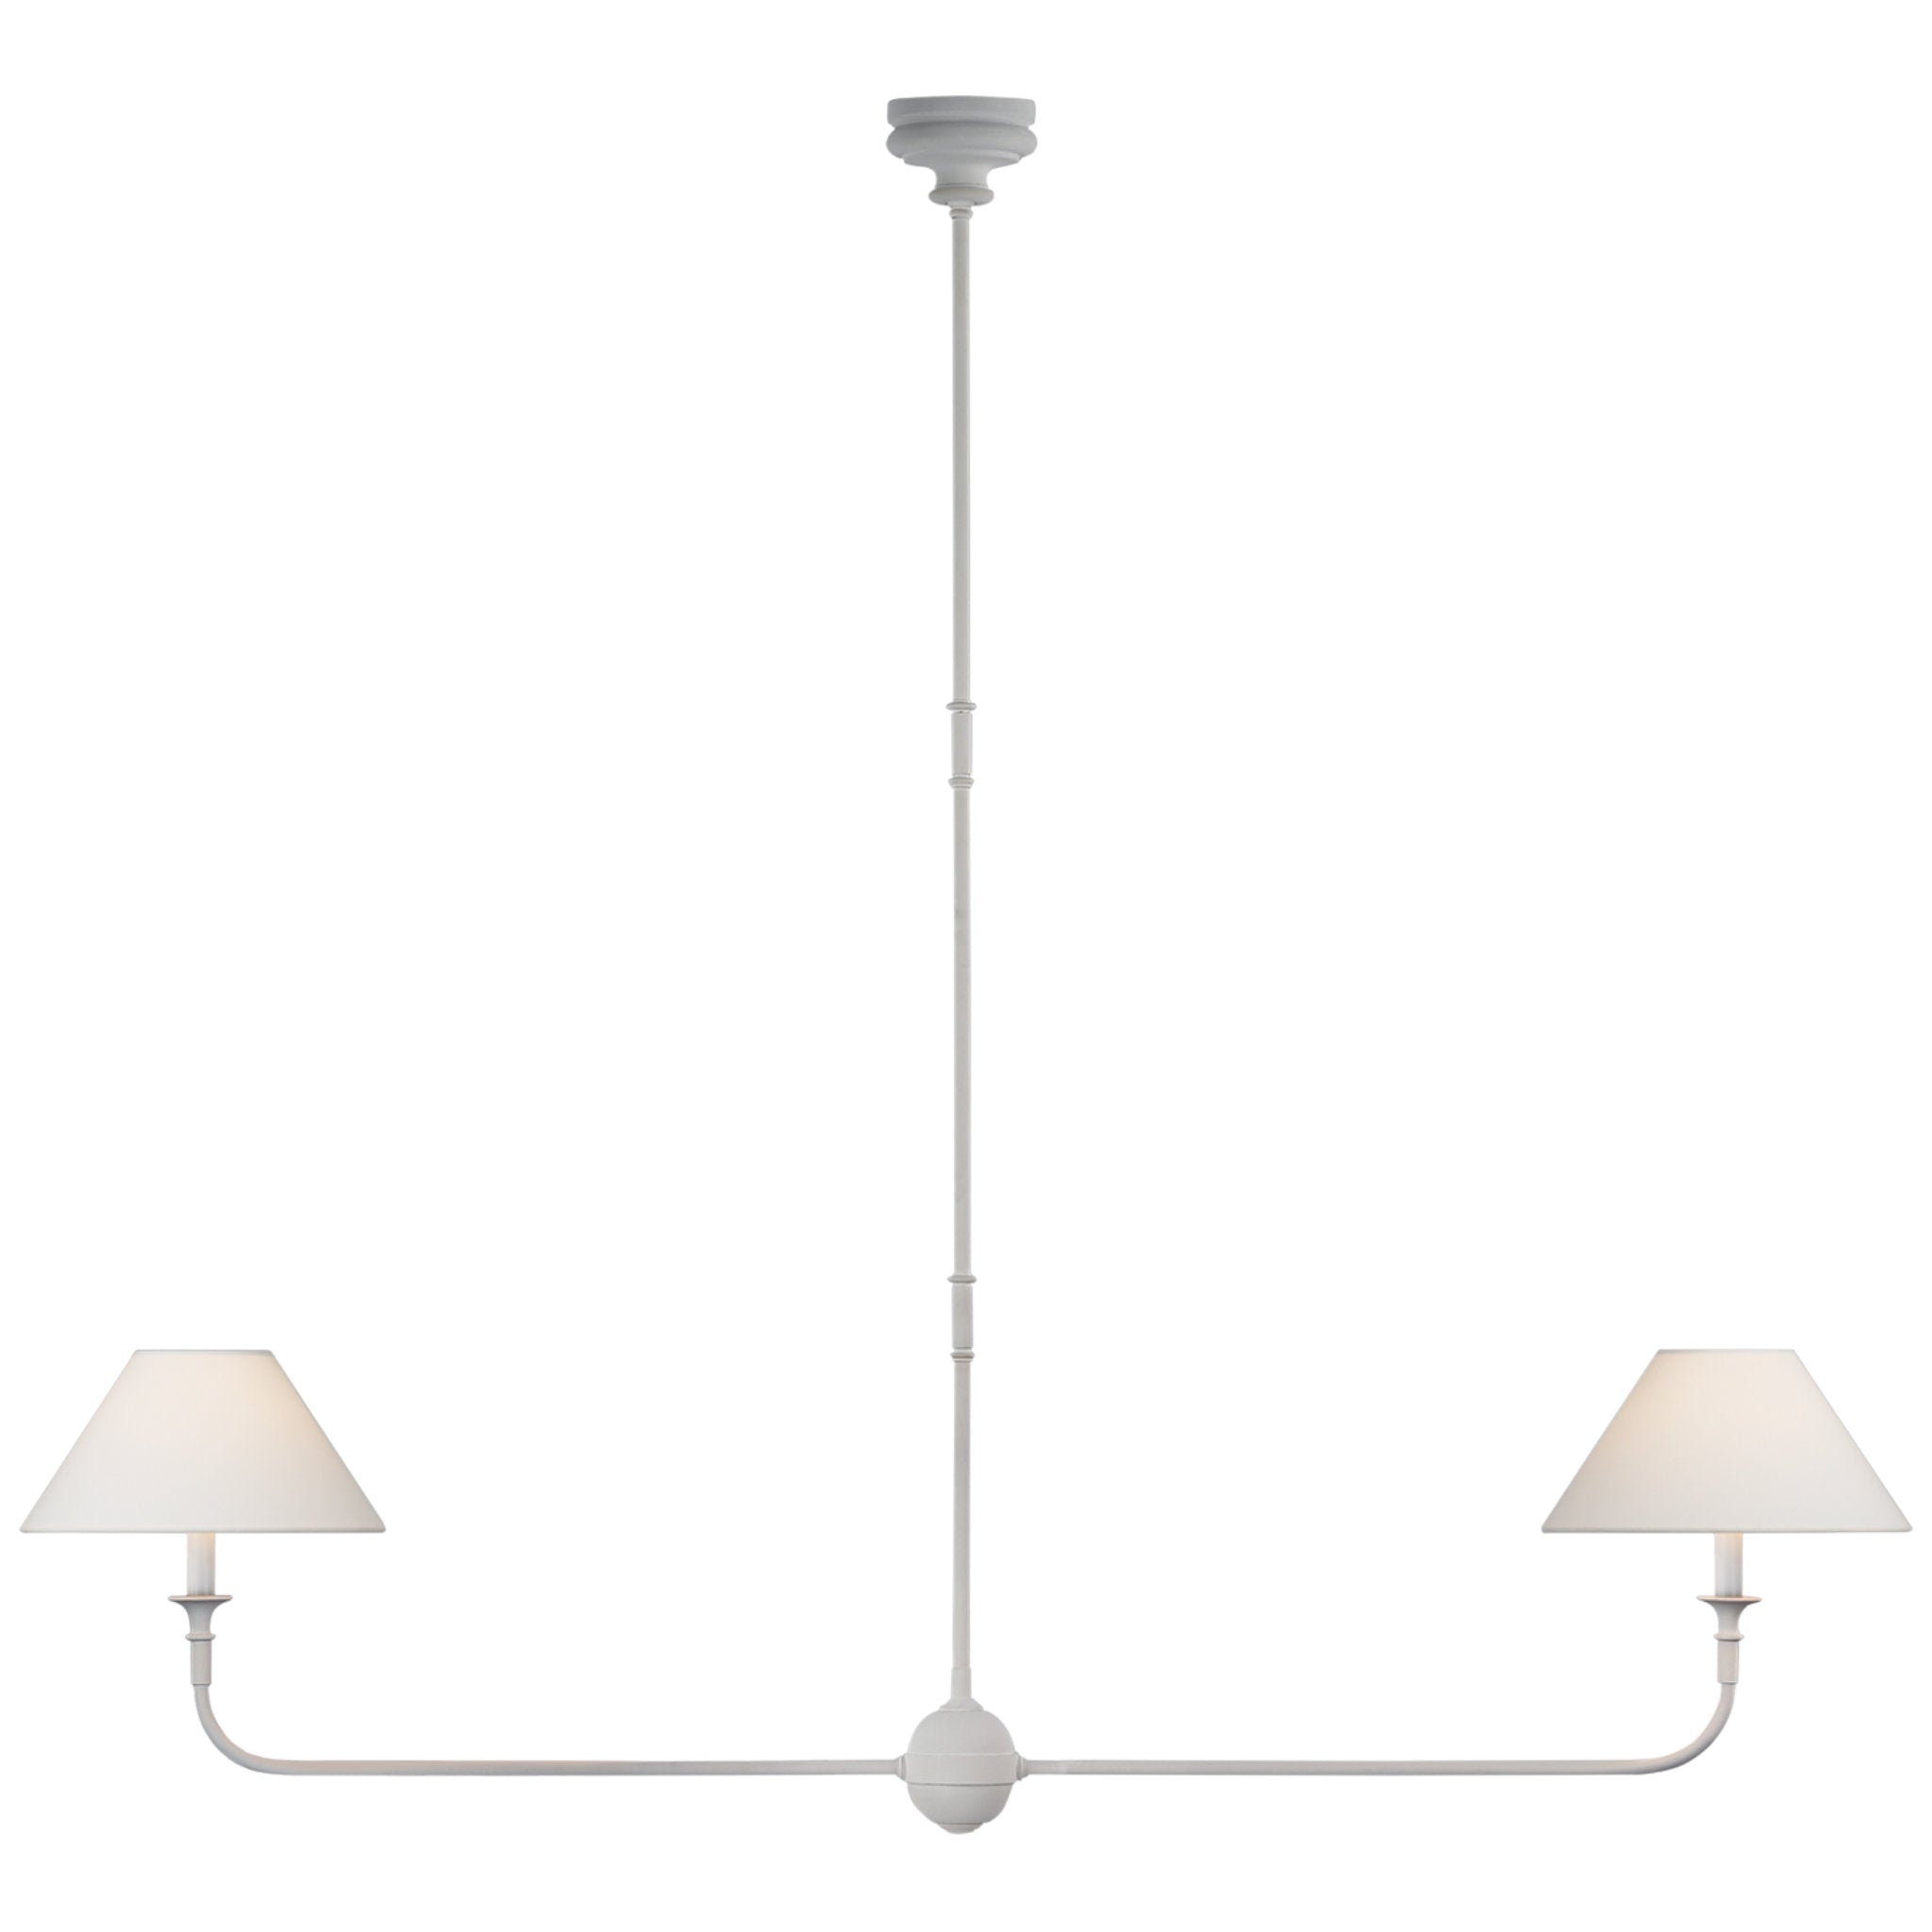 Thomas O'Brien Piaf Large Two Light Linear Pendant in Plaster White with Linen Shades